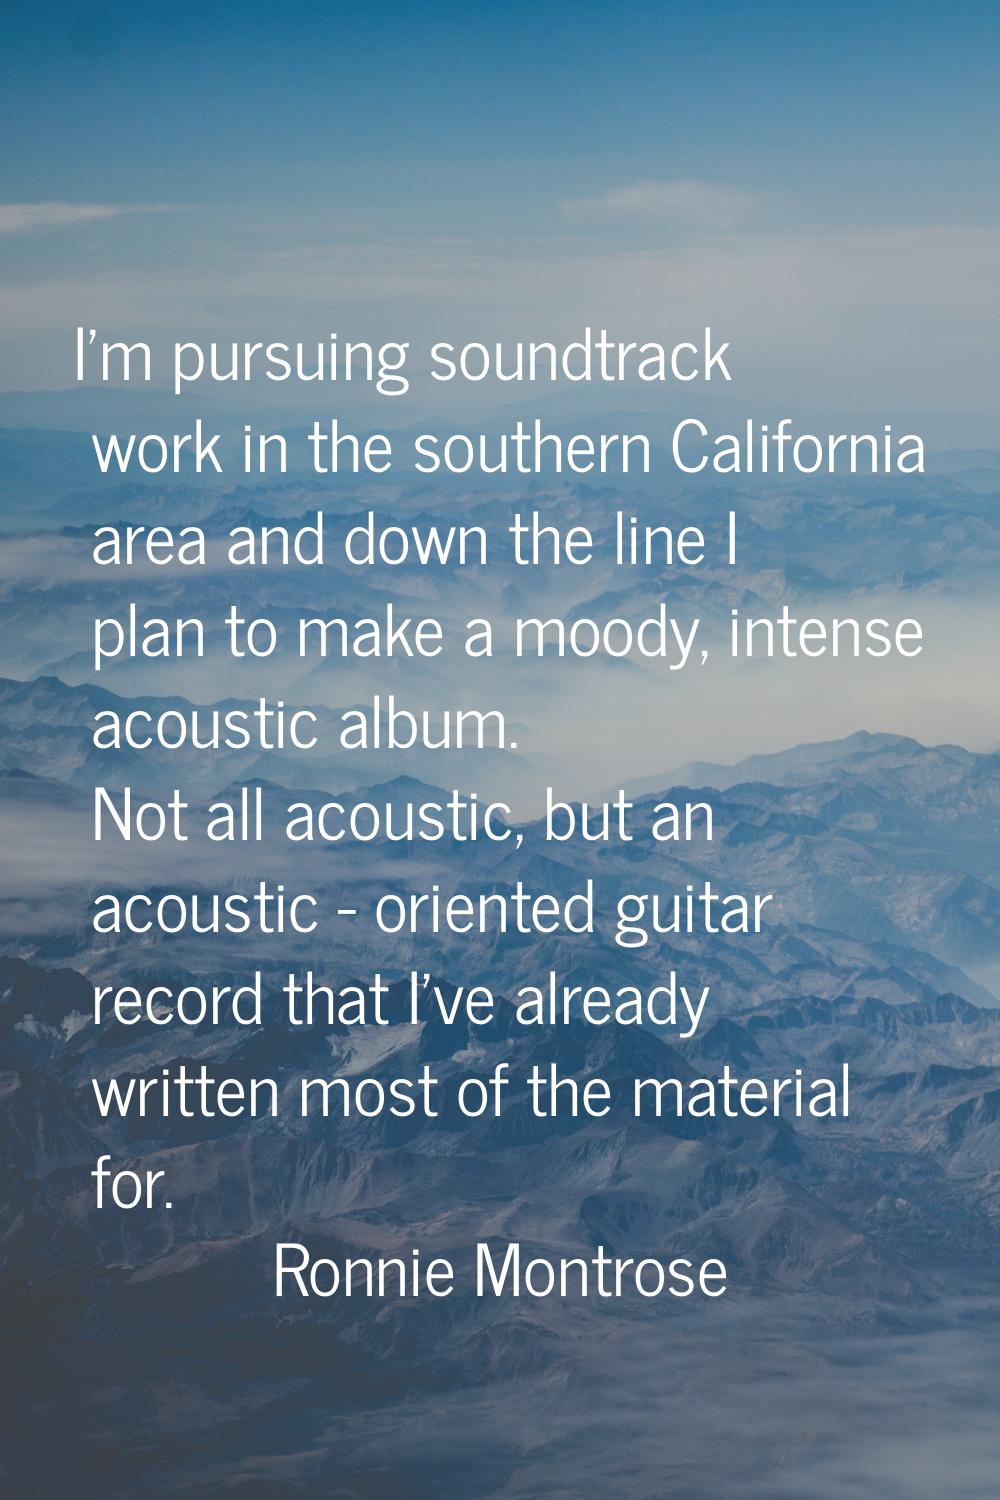 I'm pursuing soundtrack work in the southern California area and down the line I plan to make a moo